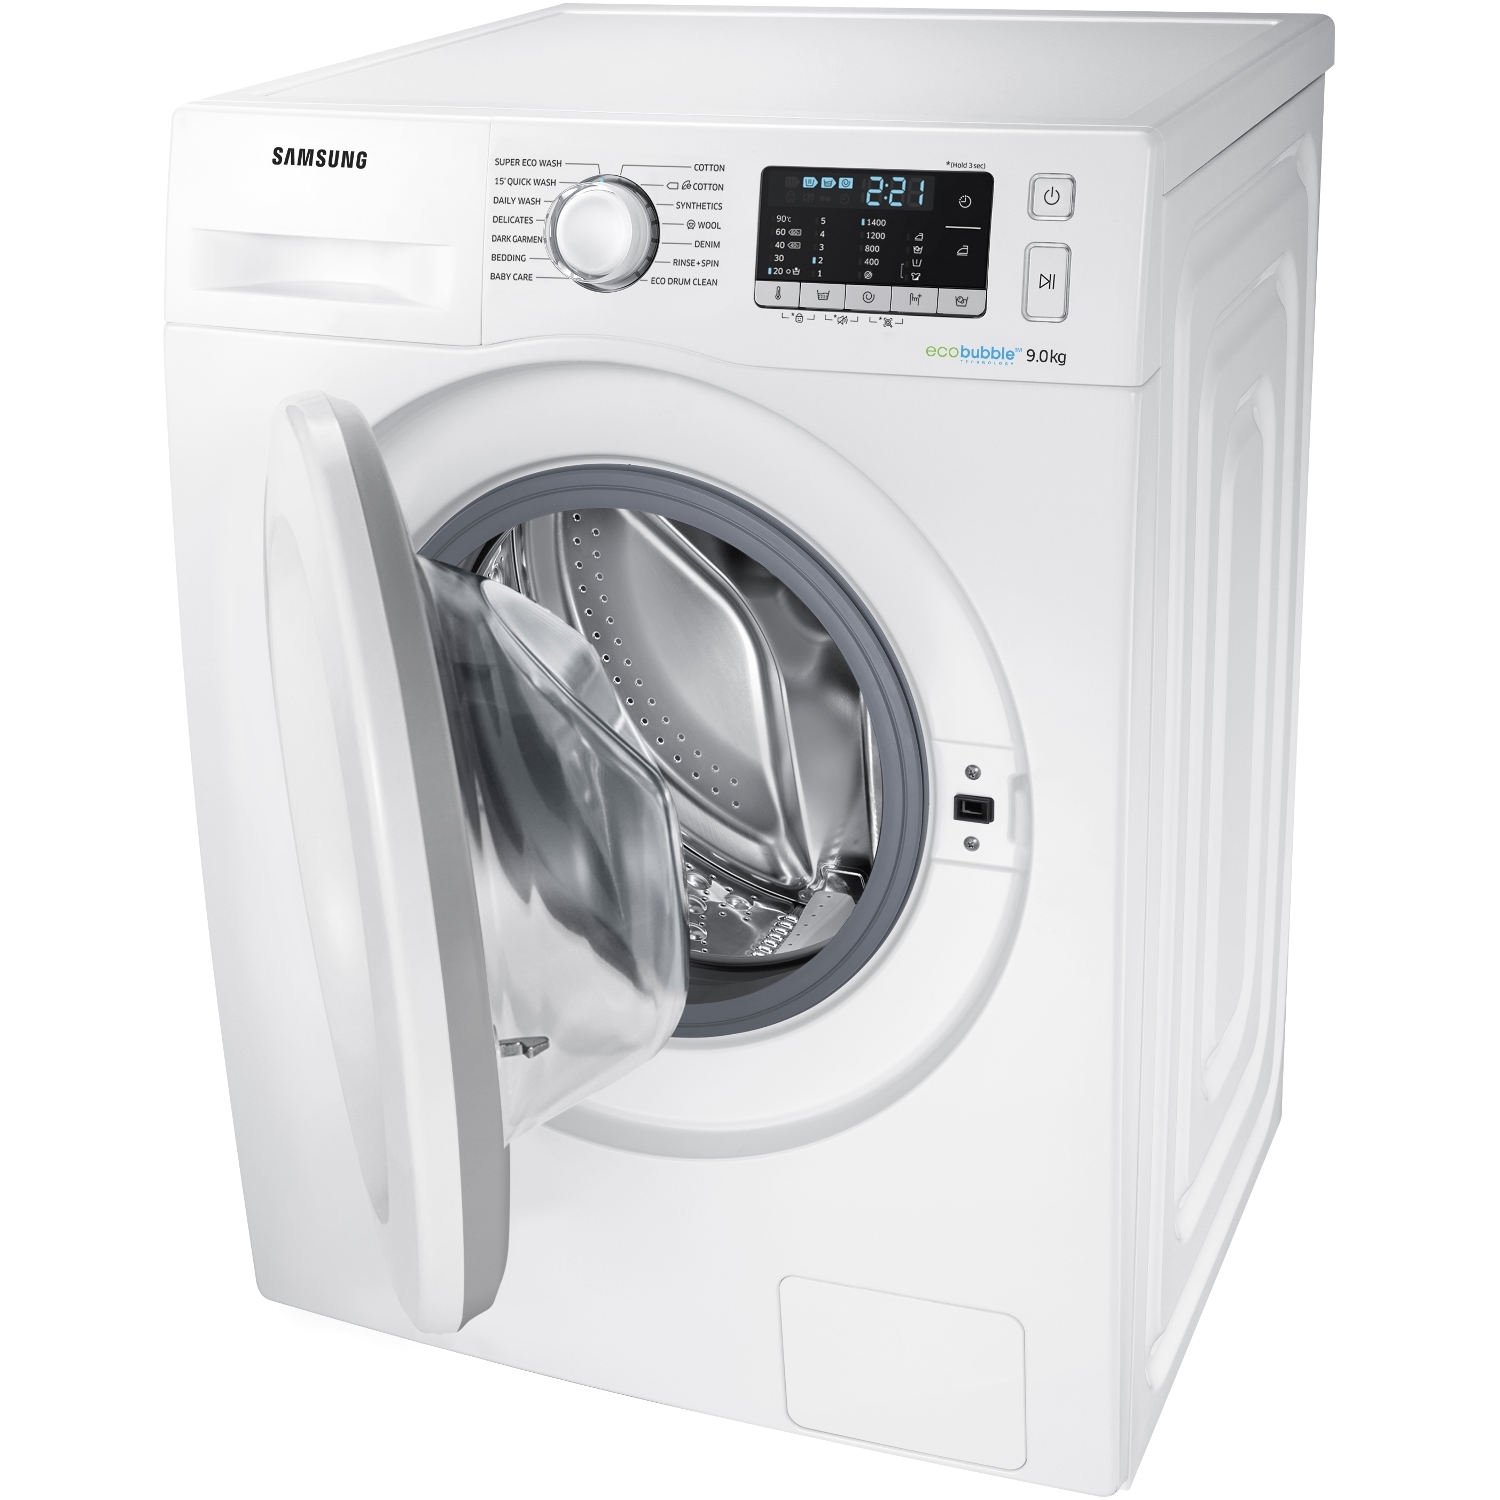 Samsung 9kg 1400 Spin Washing Machine - White - A+++ Rated - 1